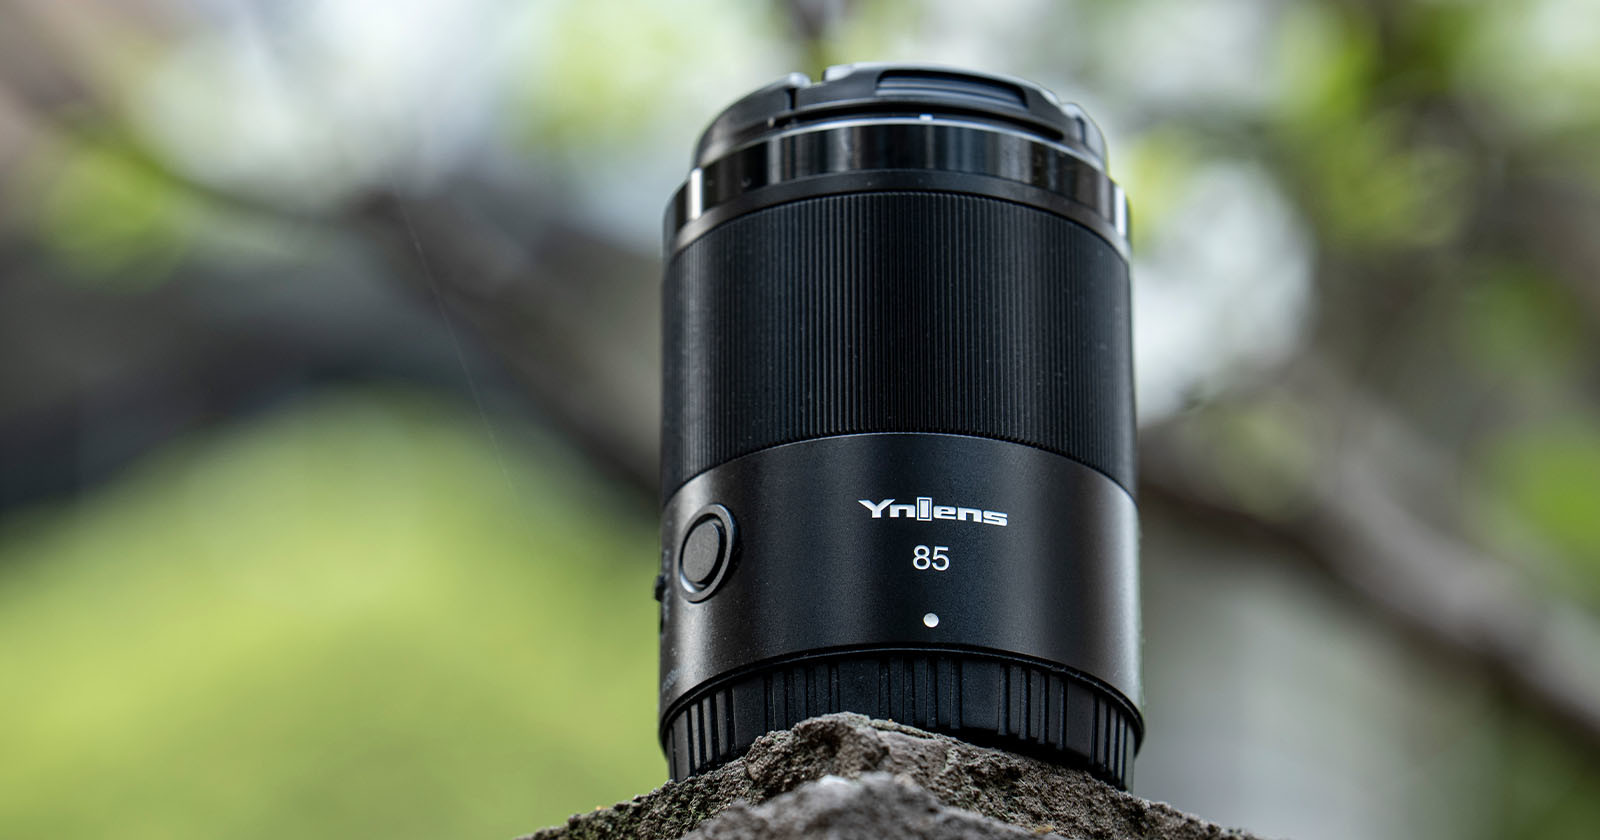 Yongnuo Launches 85mm f/1.8 for Nikon Z Mount in China